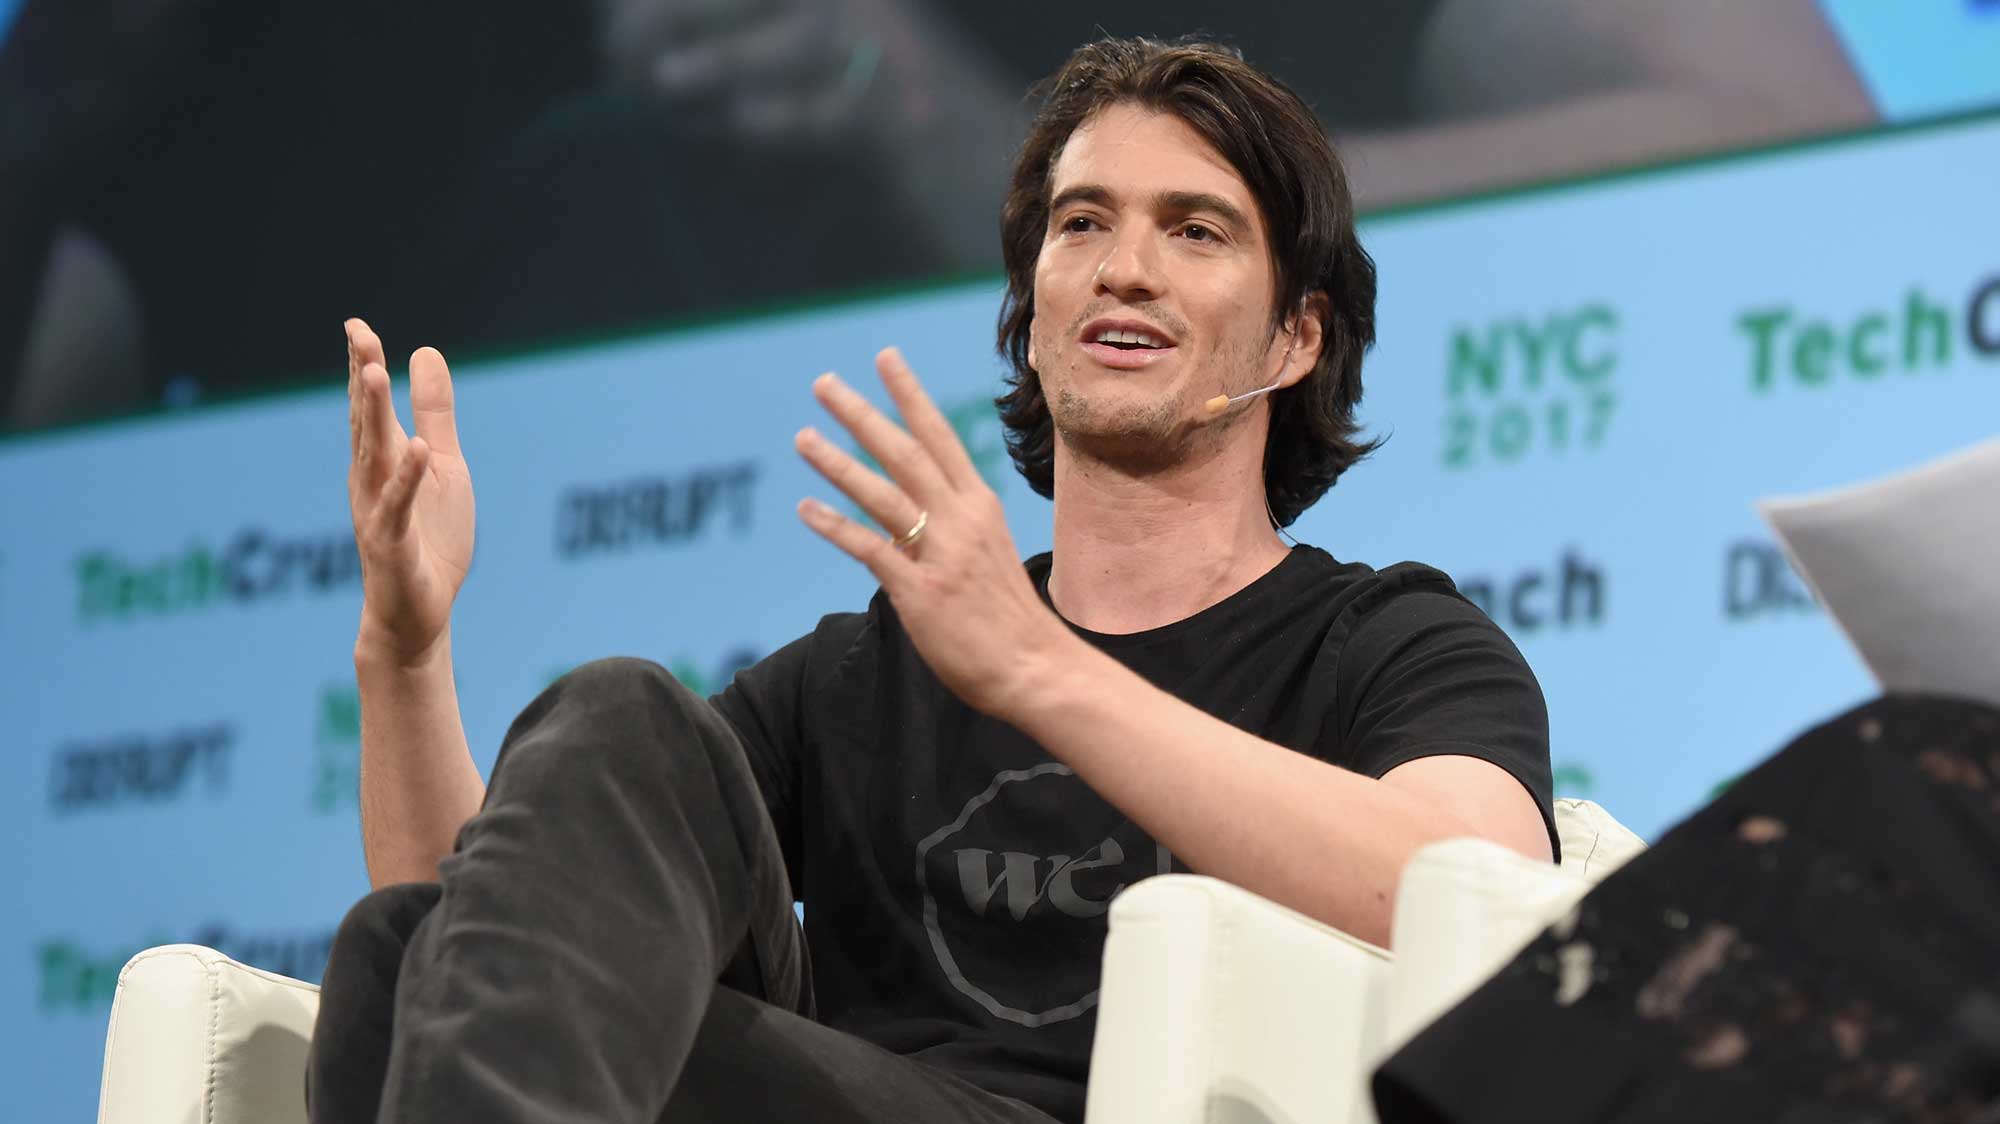 The We Company, better known as WeWork, files confidentially for IPO